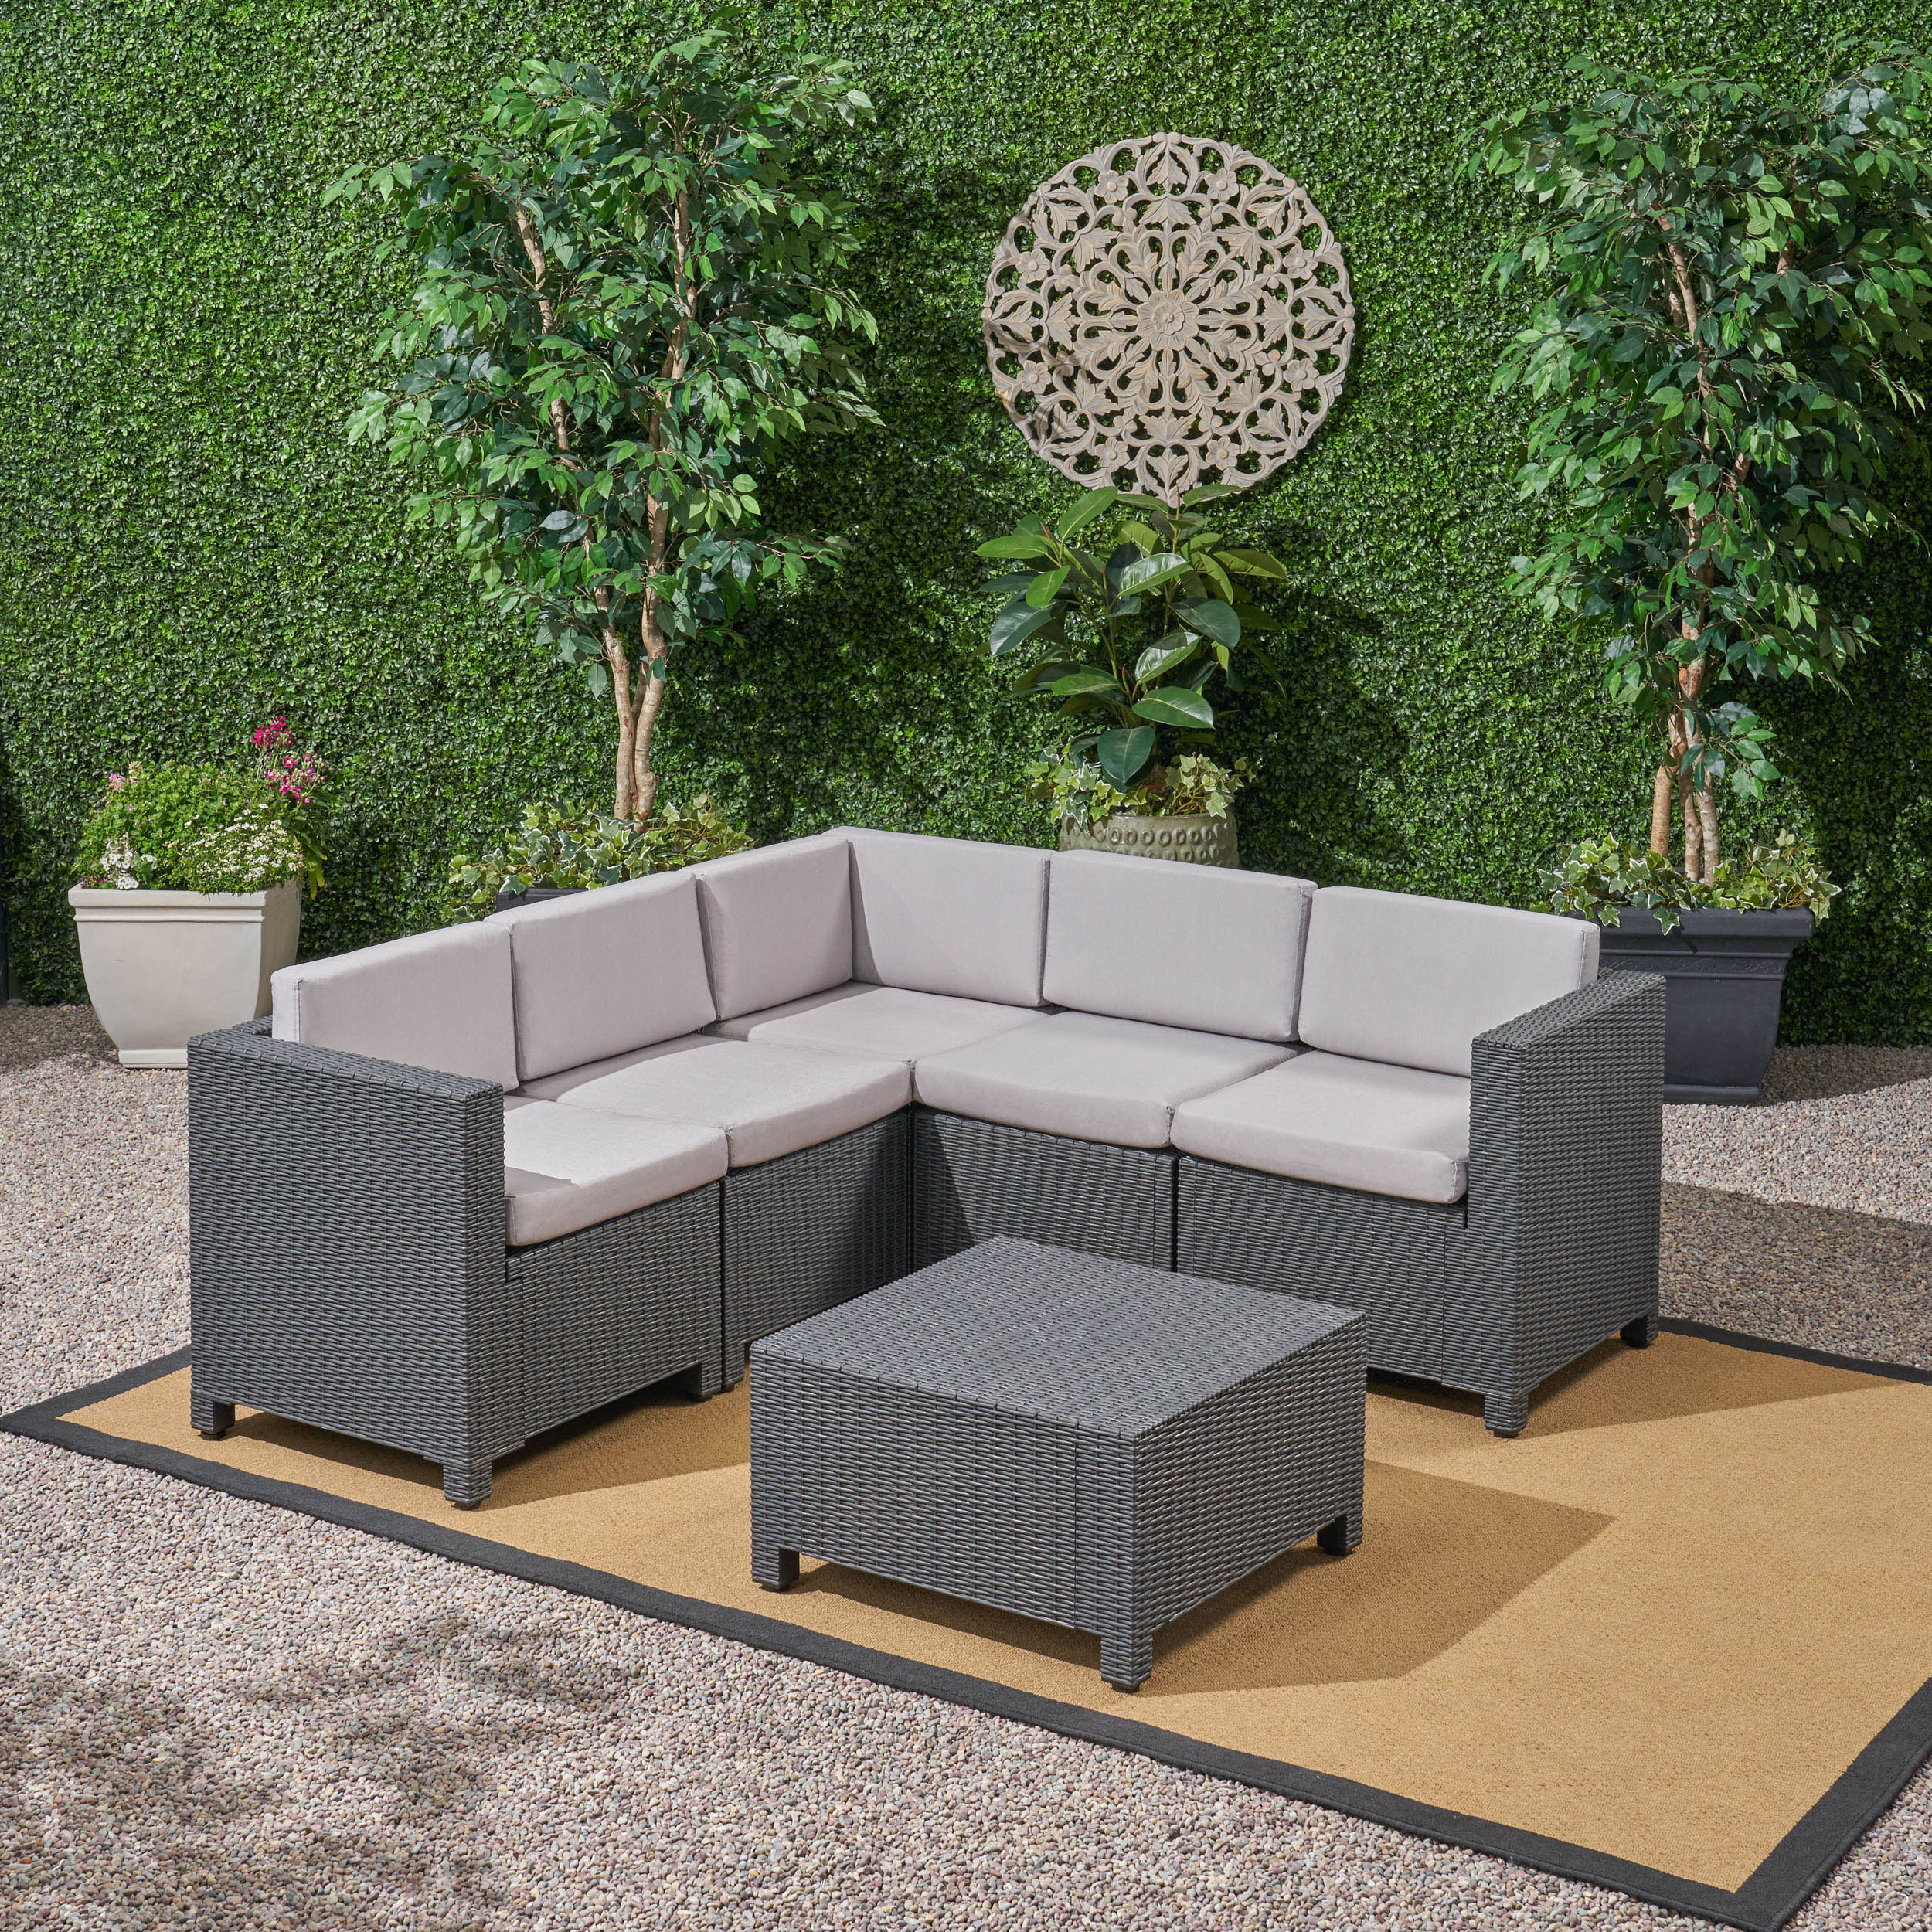 Riley Outdoor All Weather Faux Wicker 5 Seater Sectional Sofa Set with Cushions Dark Grey+Grey